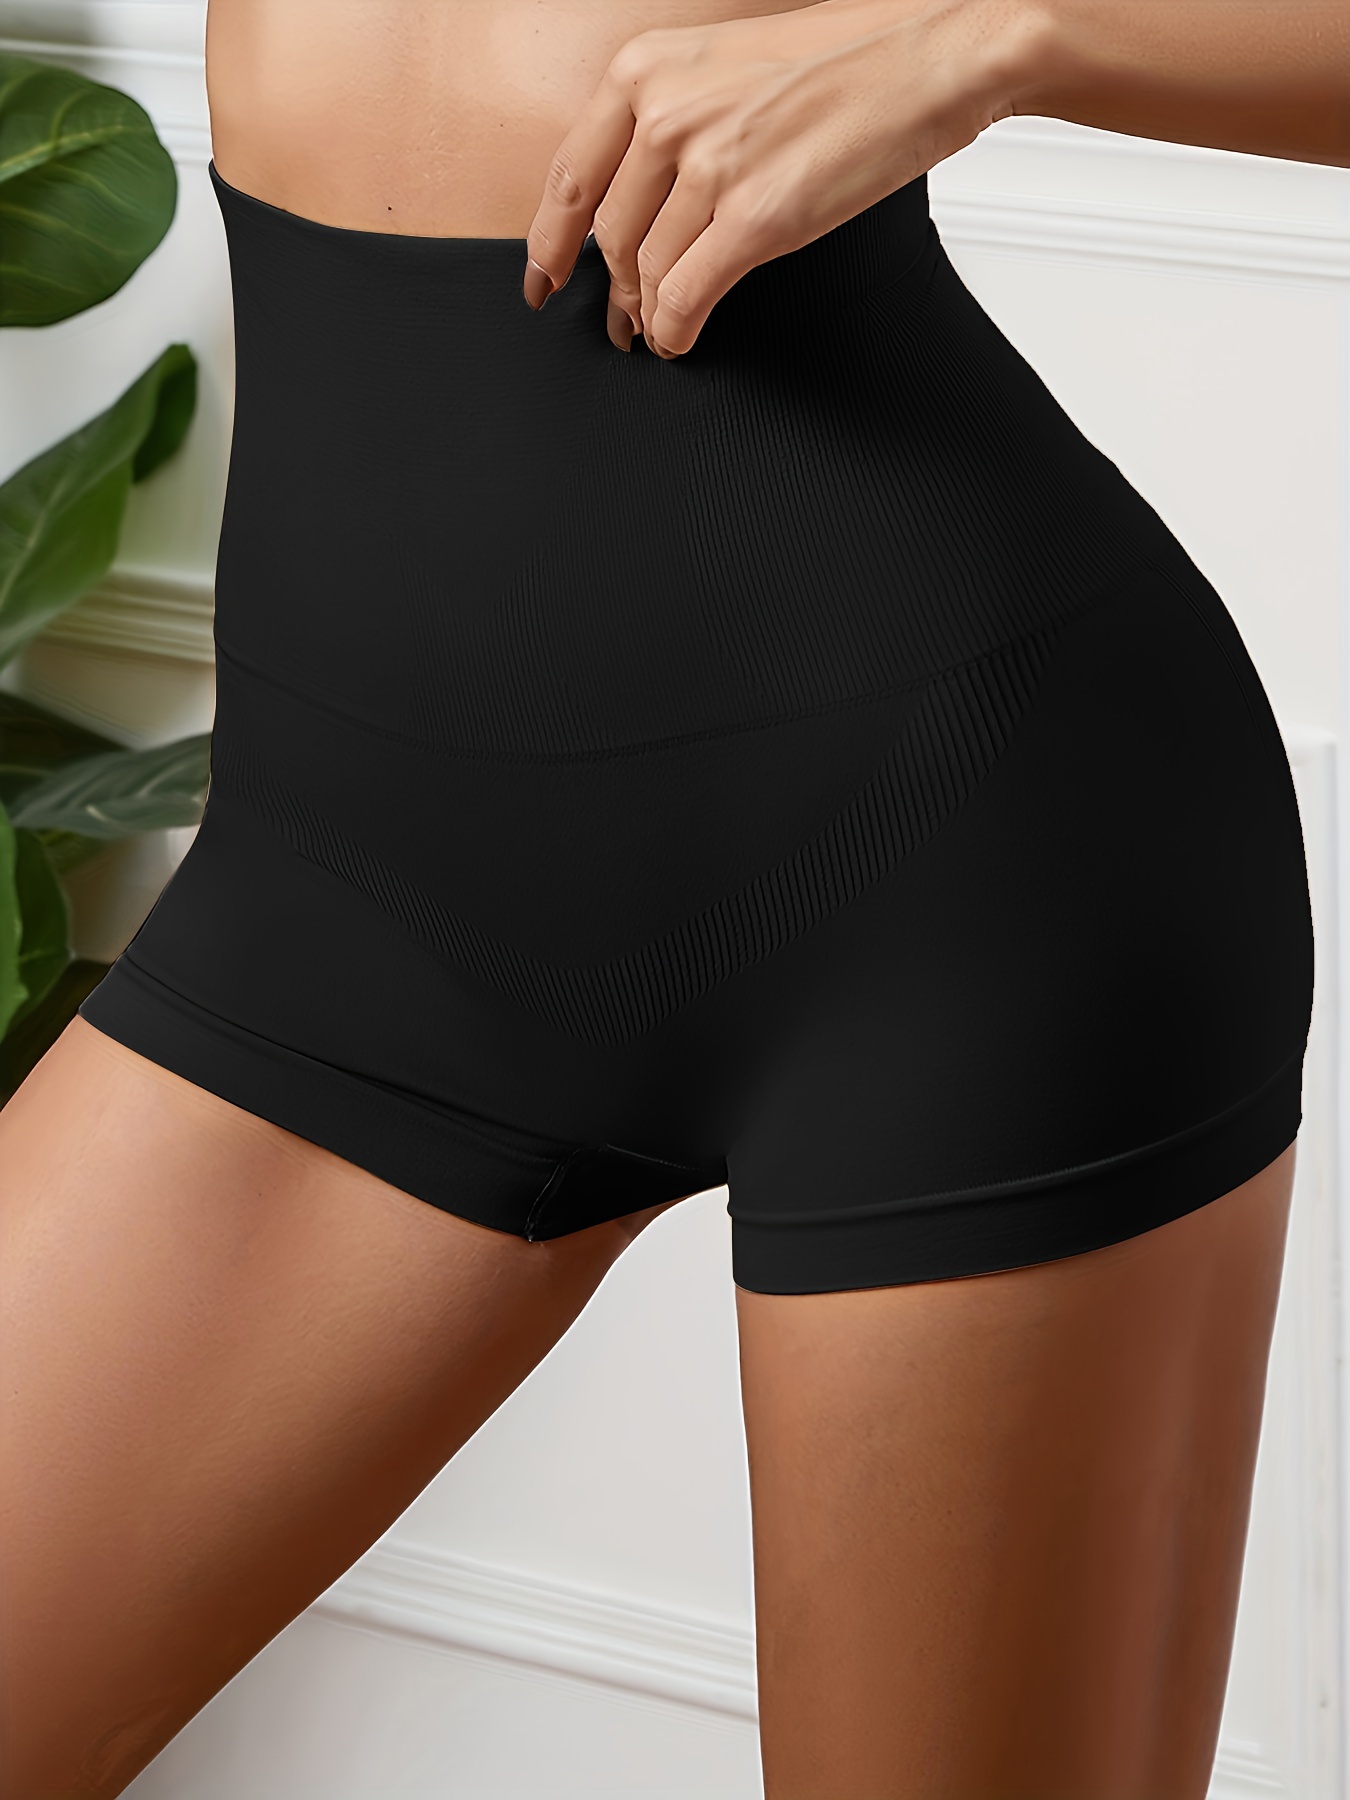 High Waist Open Butt Panties With Tummy Control And Push Up For Women  Slimming Open Bust Body Shaper And Shapwear Underwear From Fandeng, $31.15